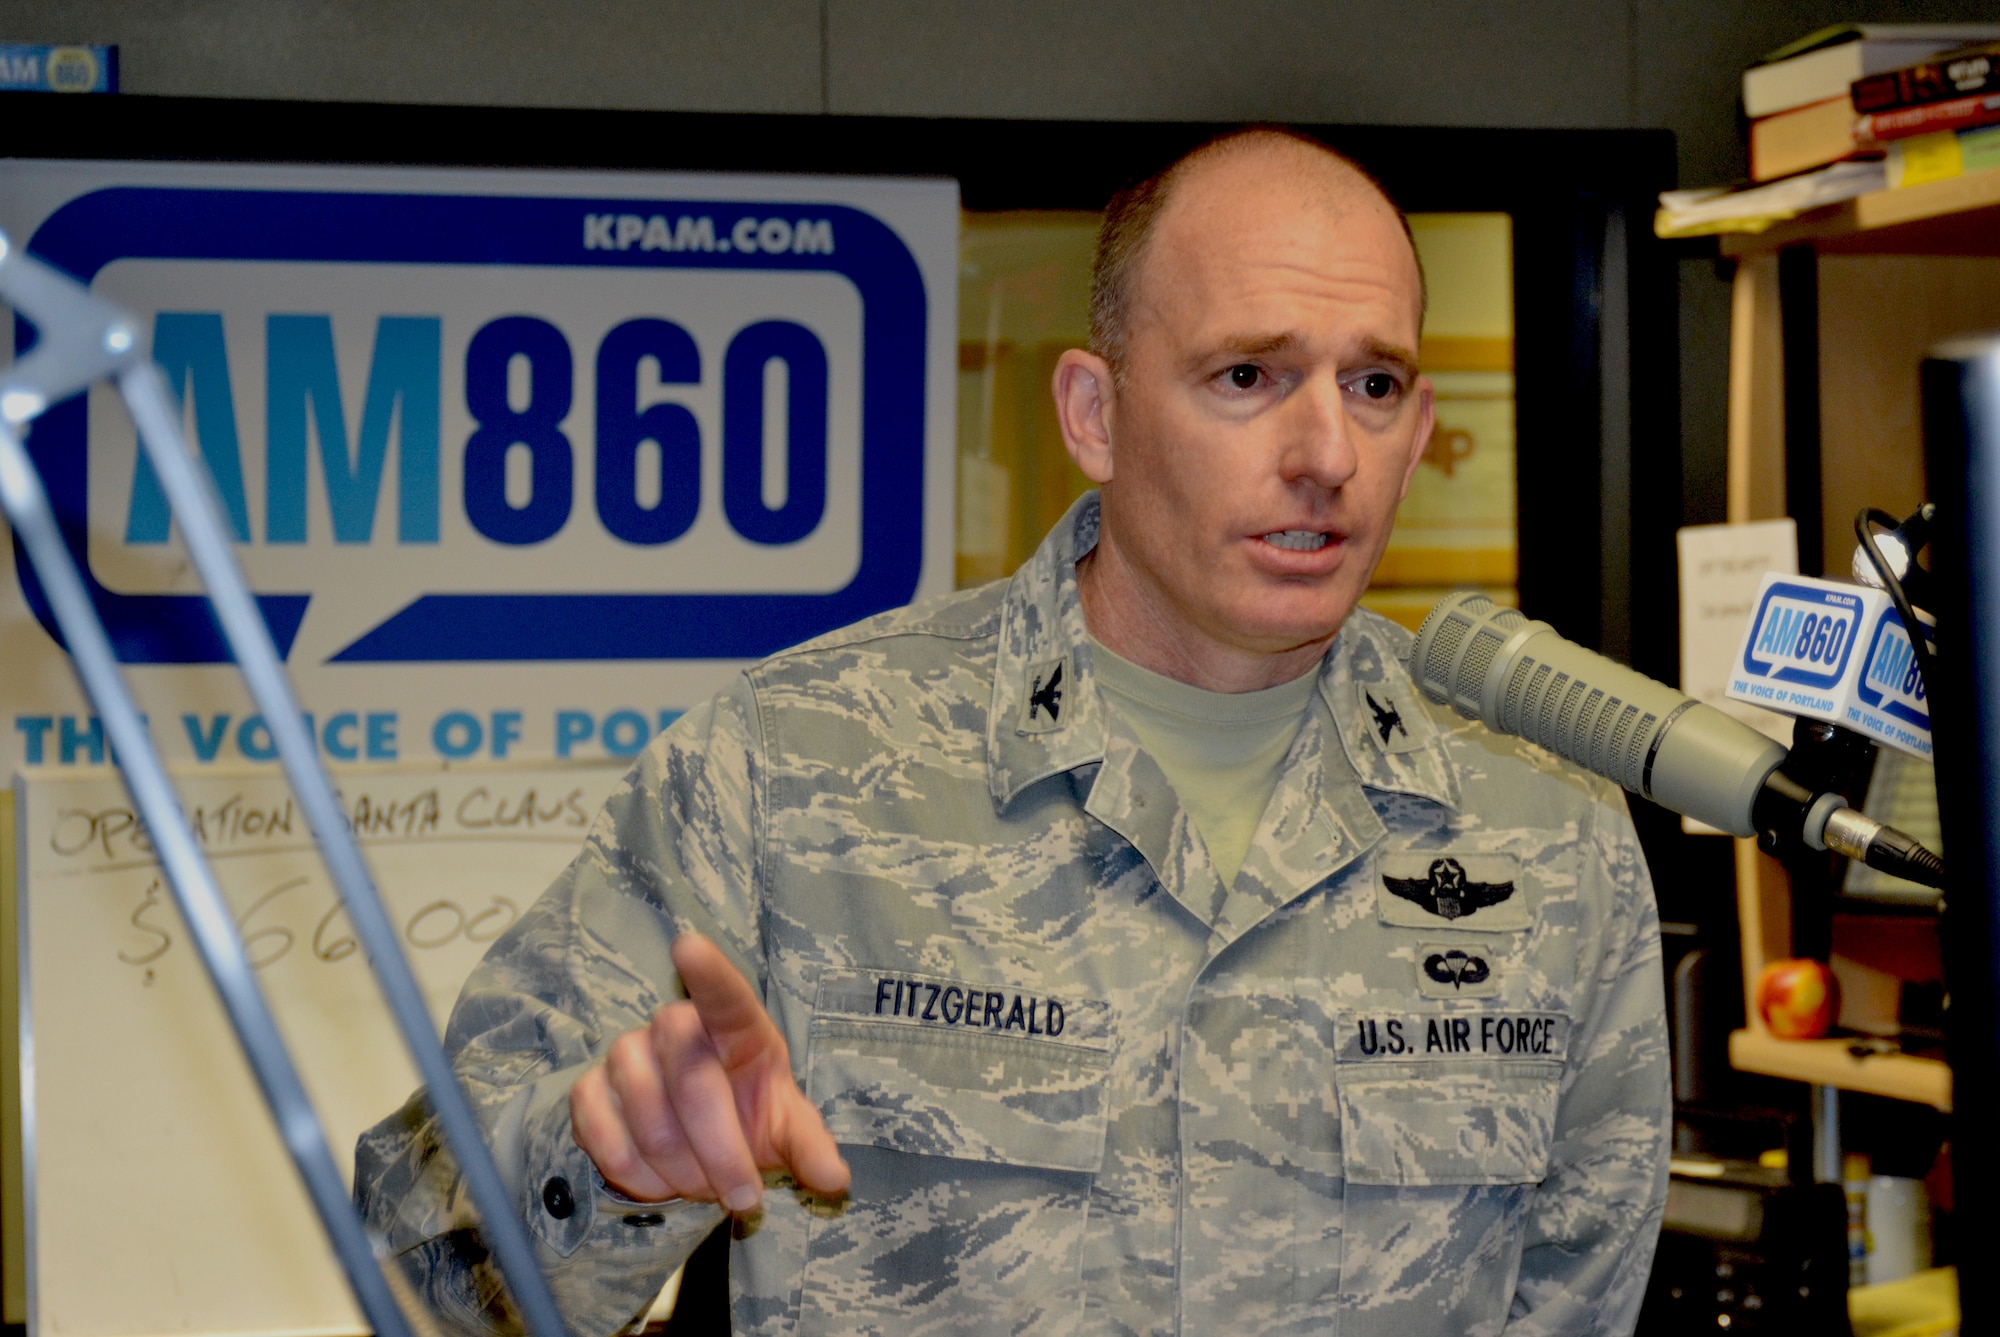 Oregon Air National Guard Col. Paul Fitzgerald, 142nd Fighter Wing Mission Support Commander, answers questions during the Operation Santa Claus fund raising event held on the Bob Miller Show, Nov. 30, 2012 here in Portland, Ore. (U.S. Air Force photo by Tech. Sgt. Emily Thompson, 142nd Fighter Wing Public Affairs/Released)